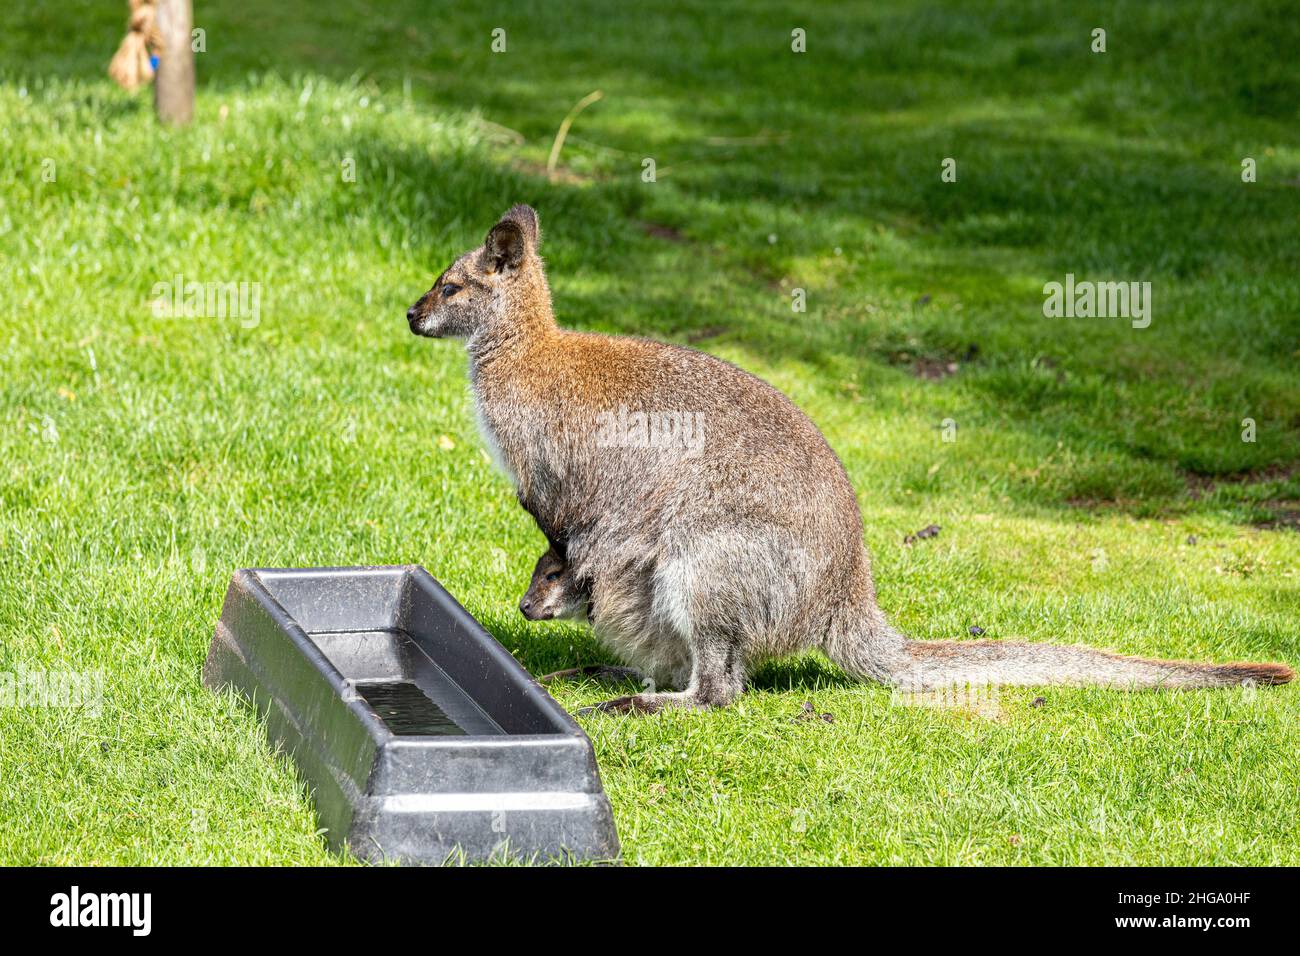 A kangaroo with a joey in her pouch at Yorkshire Wildlife Park near Doncaster, South Yorkshire UK Stock Photo